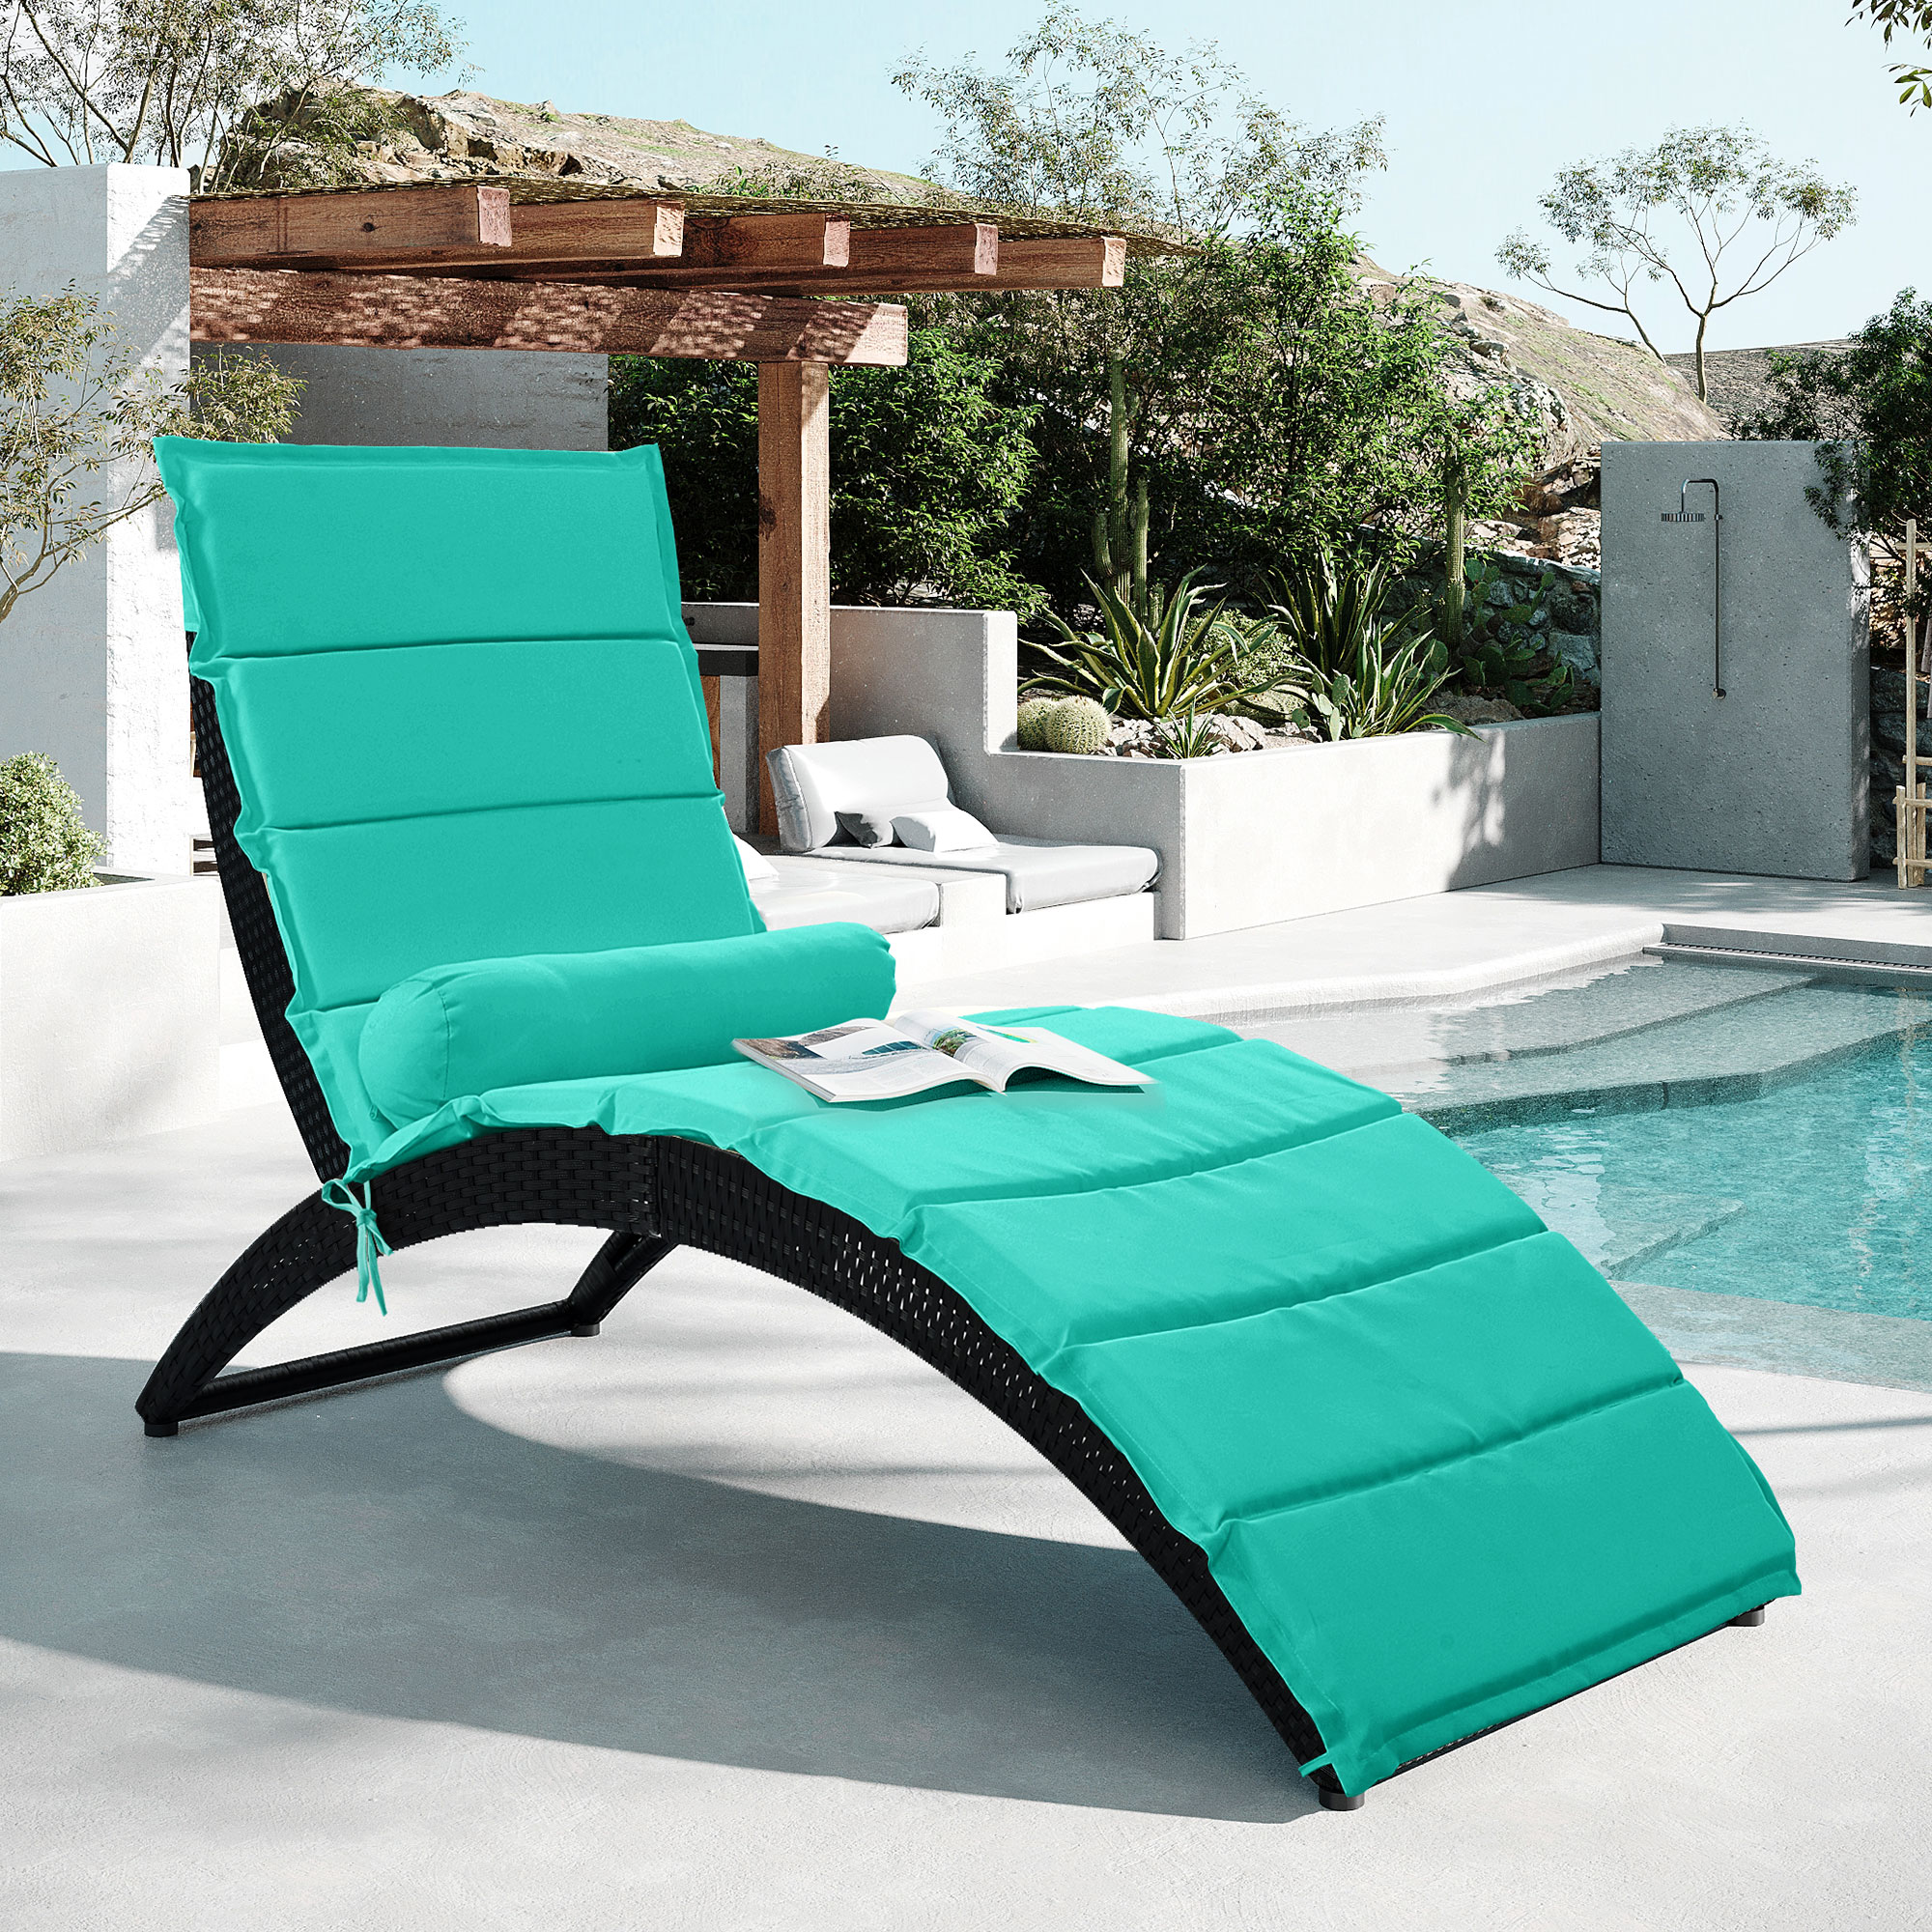 Lounge Chair Outdoor, Foldable Outdoor Chaise Lounge, Patio Wicker Sun Lounger with Removable Cushion and Bolster Pillow for Poolside Deck Porch Garden, 1 Set, Blue - image 2 of 12